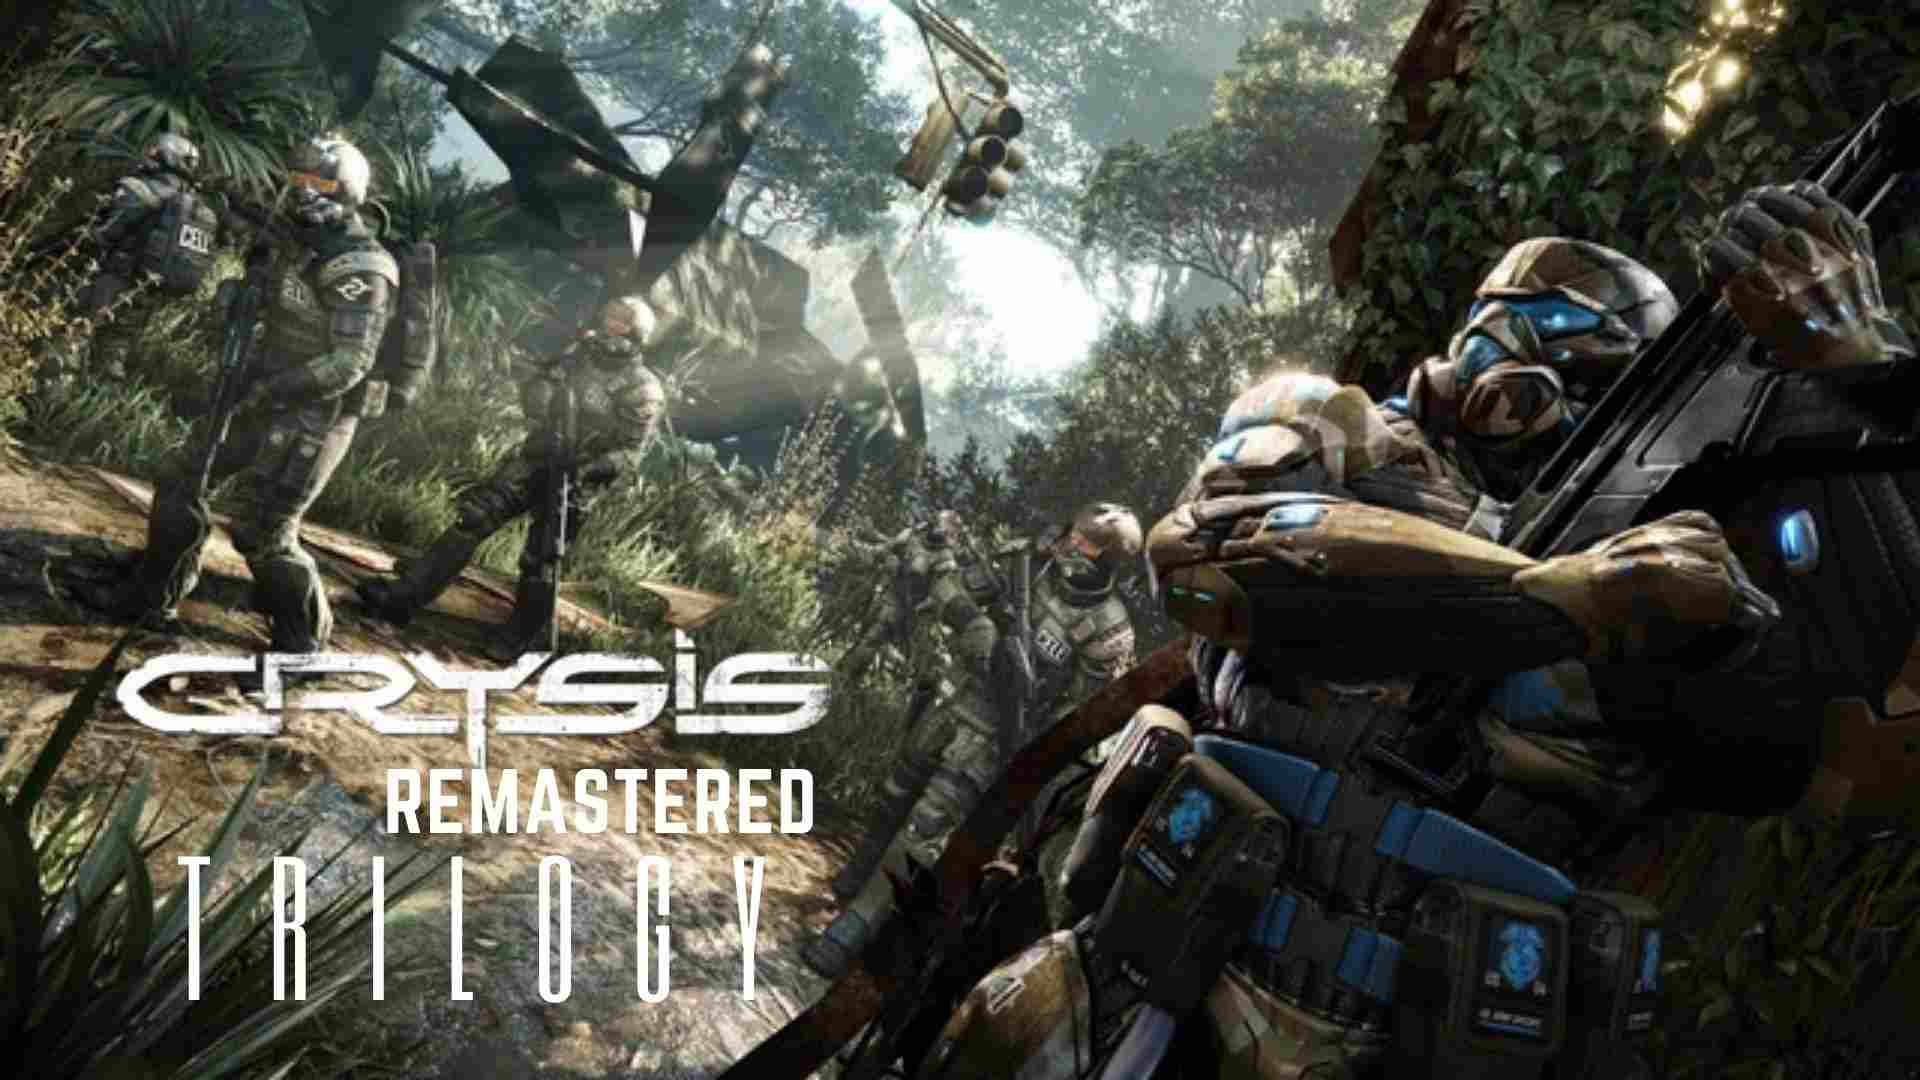 Experience Crysis Remastered in stunning 4K Resolution Wallpaper